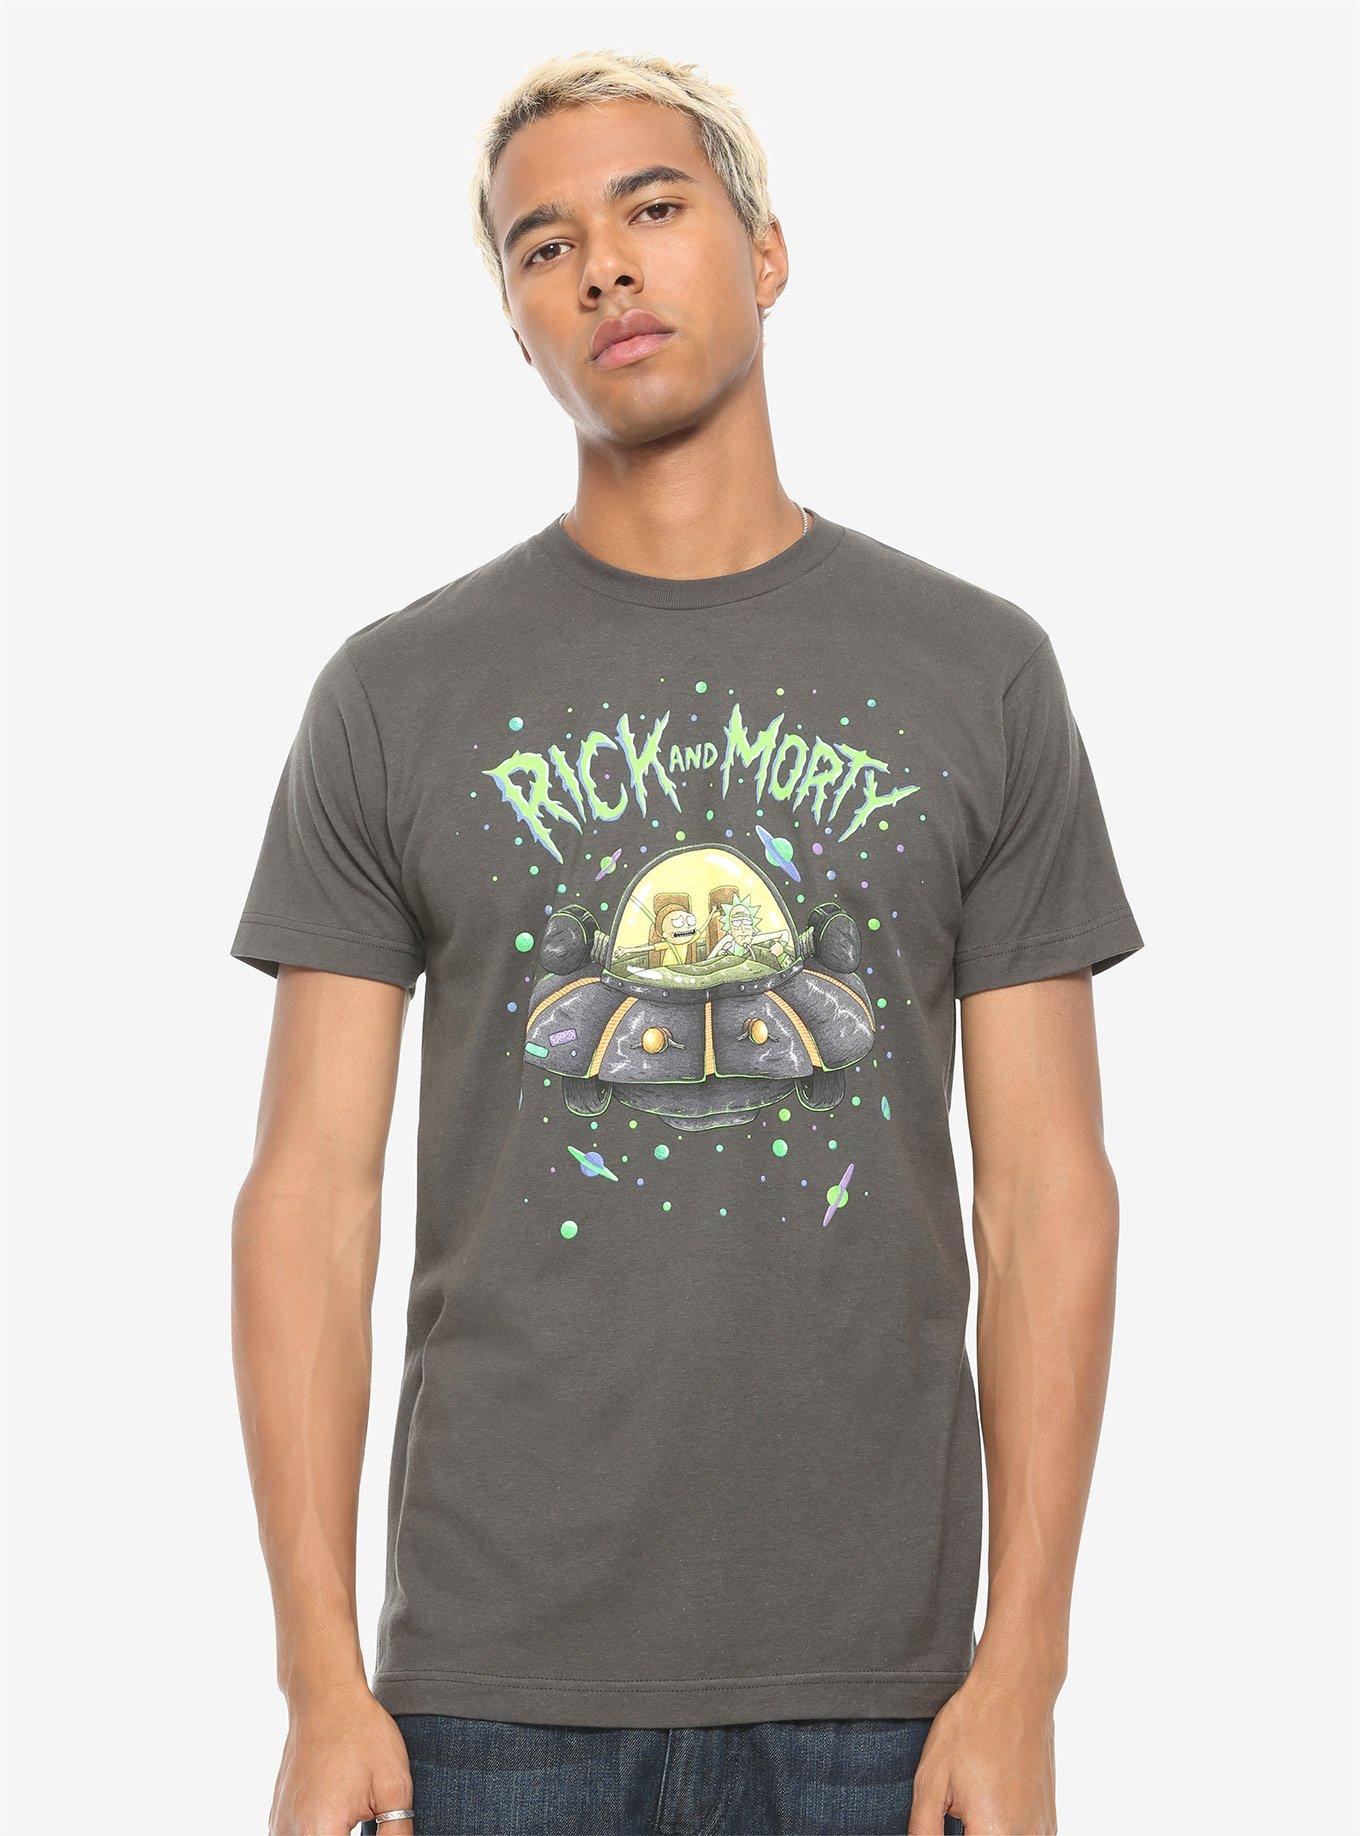 Rick And Morty SpaceShip T-Shirt, MULTI, alternate